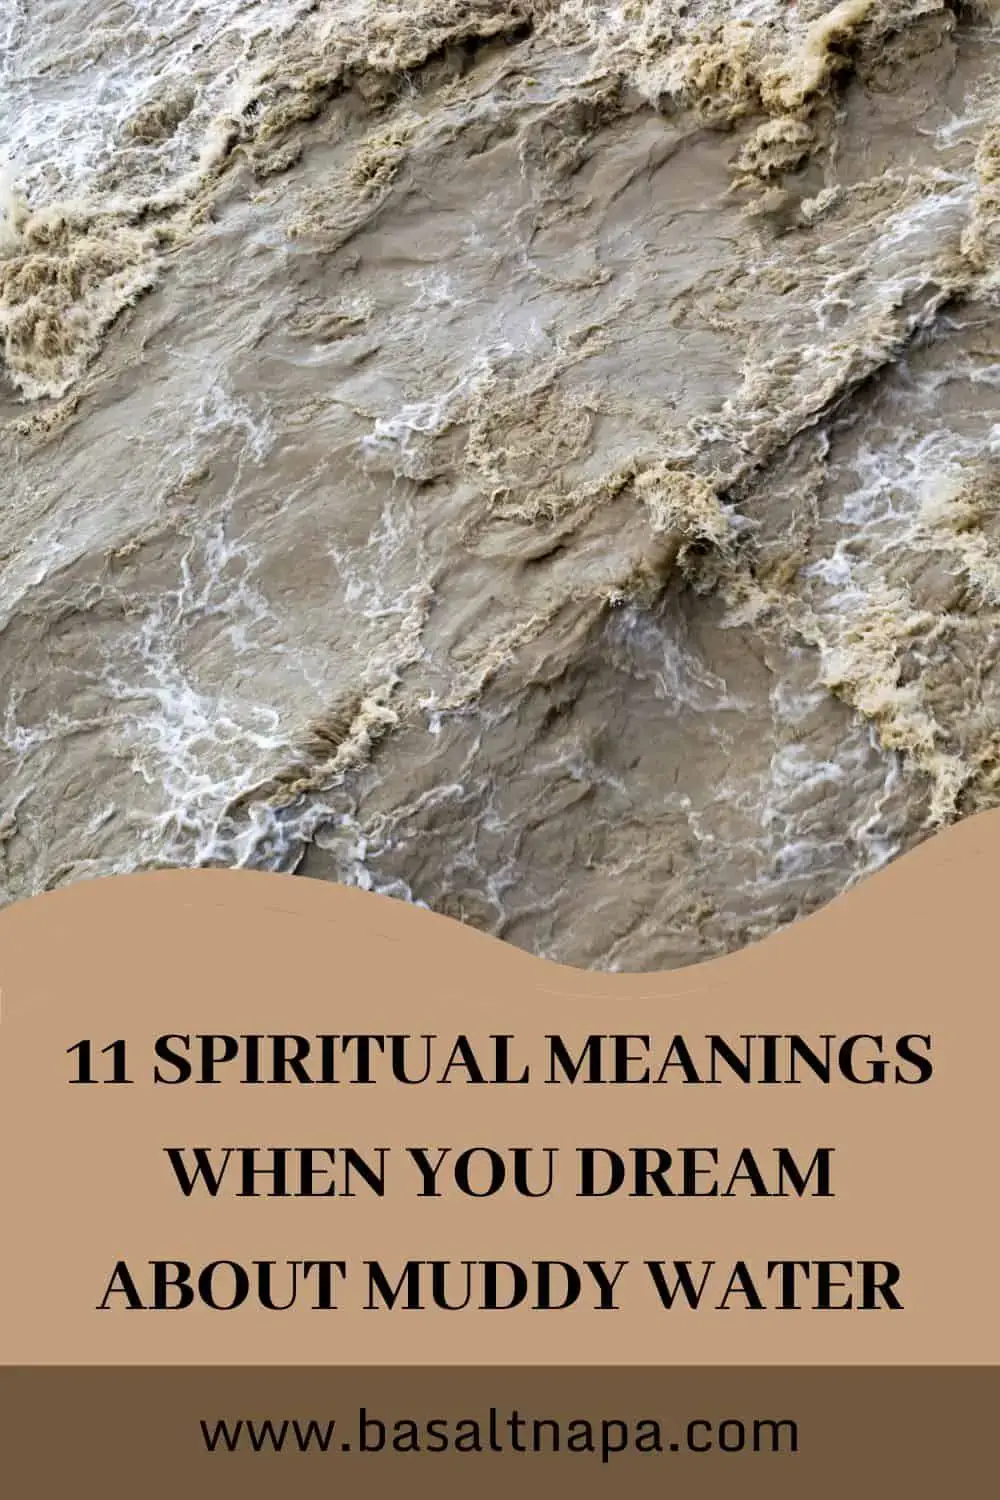 What Does Muddy Water Mean In A Dream?